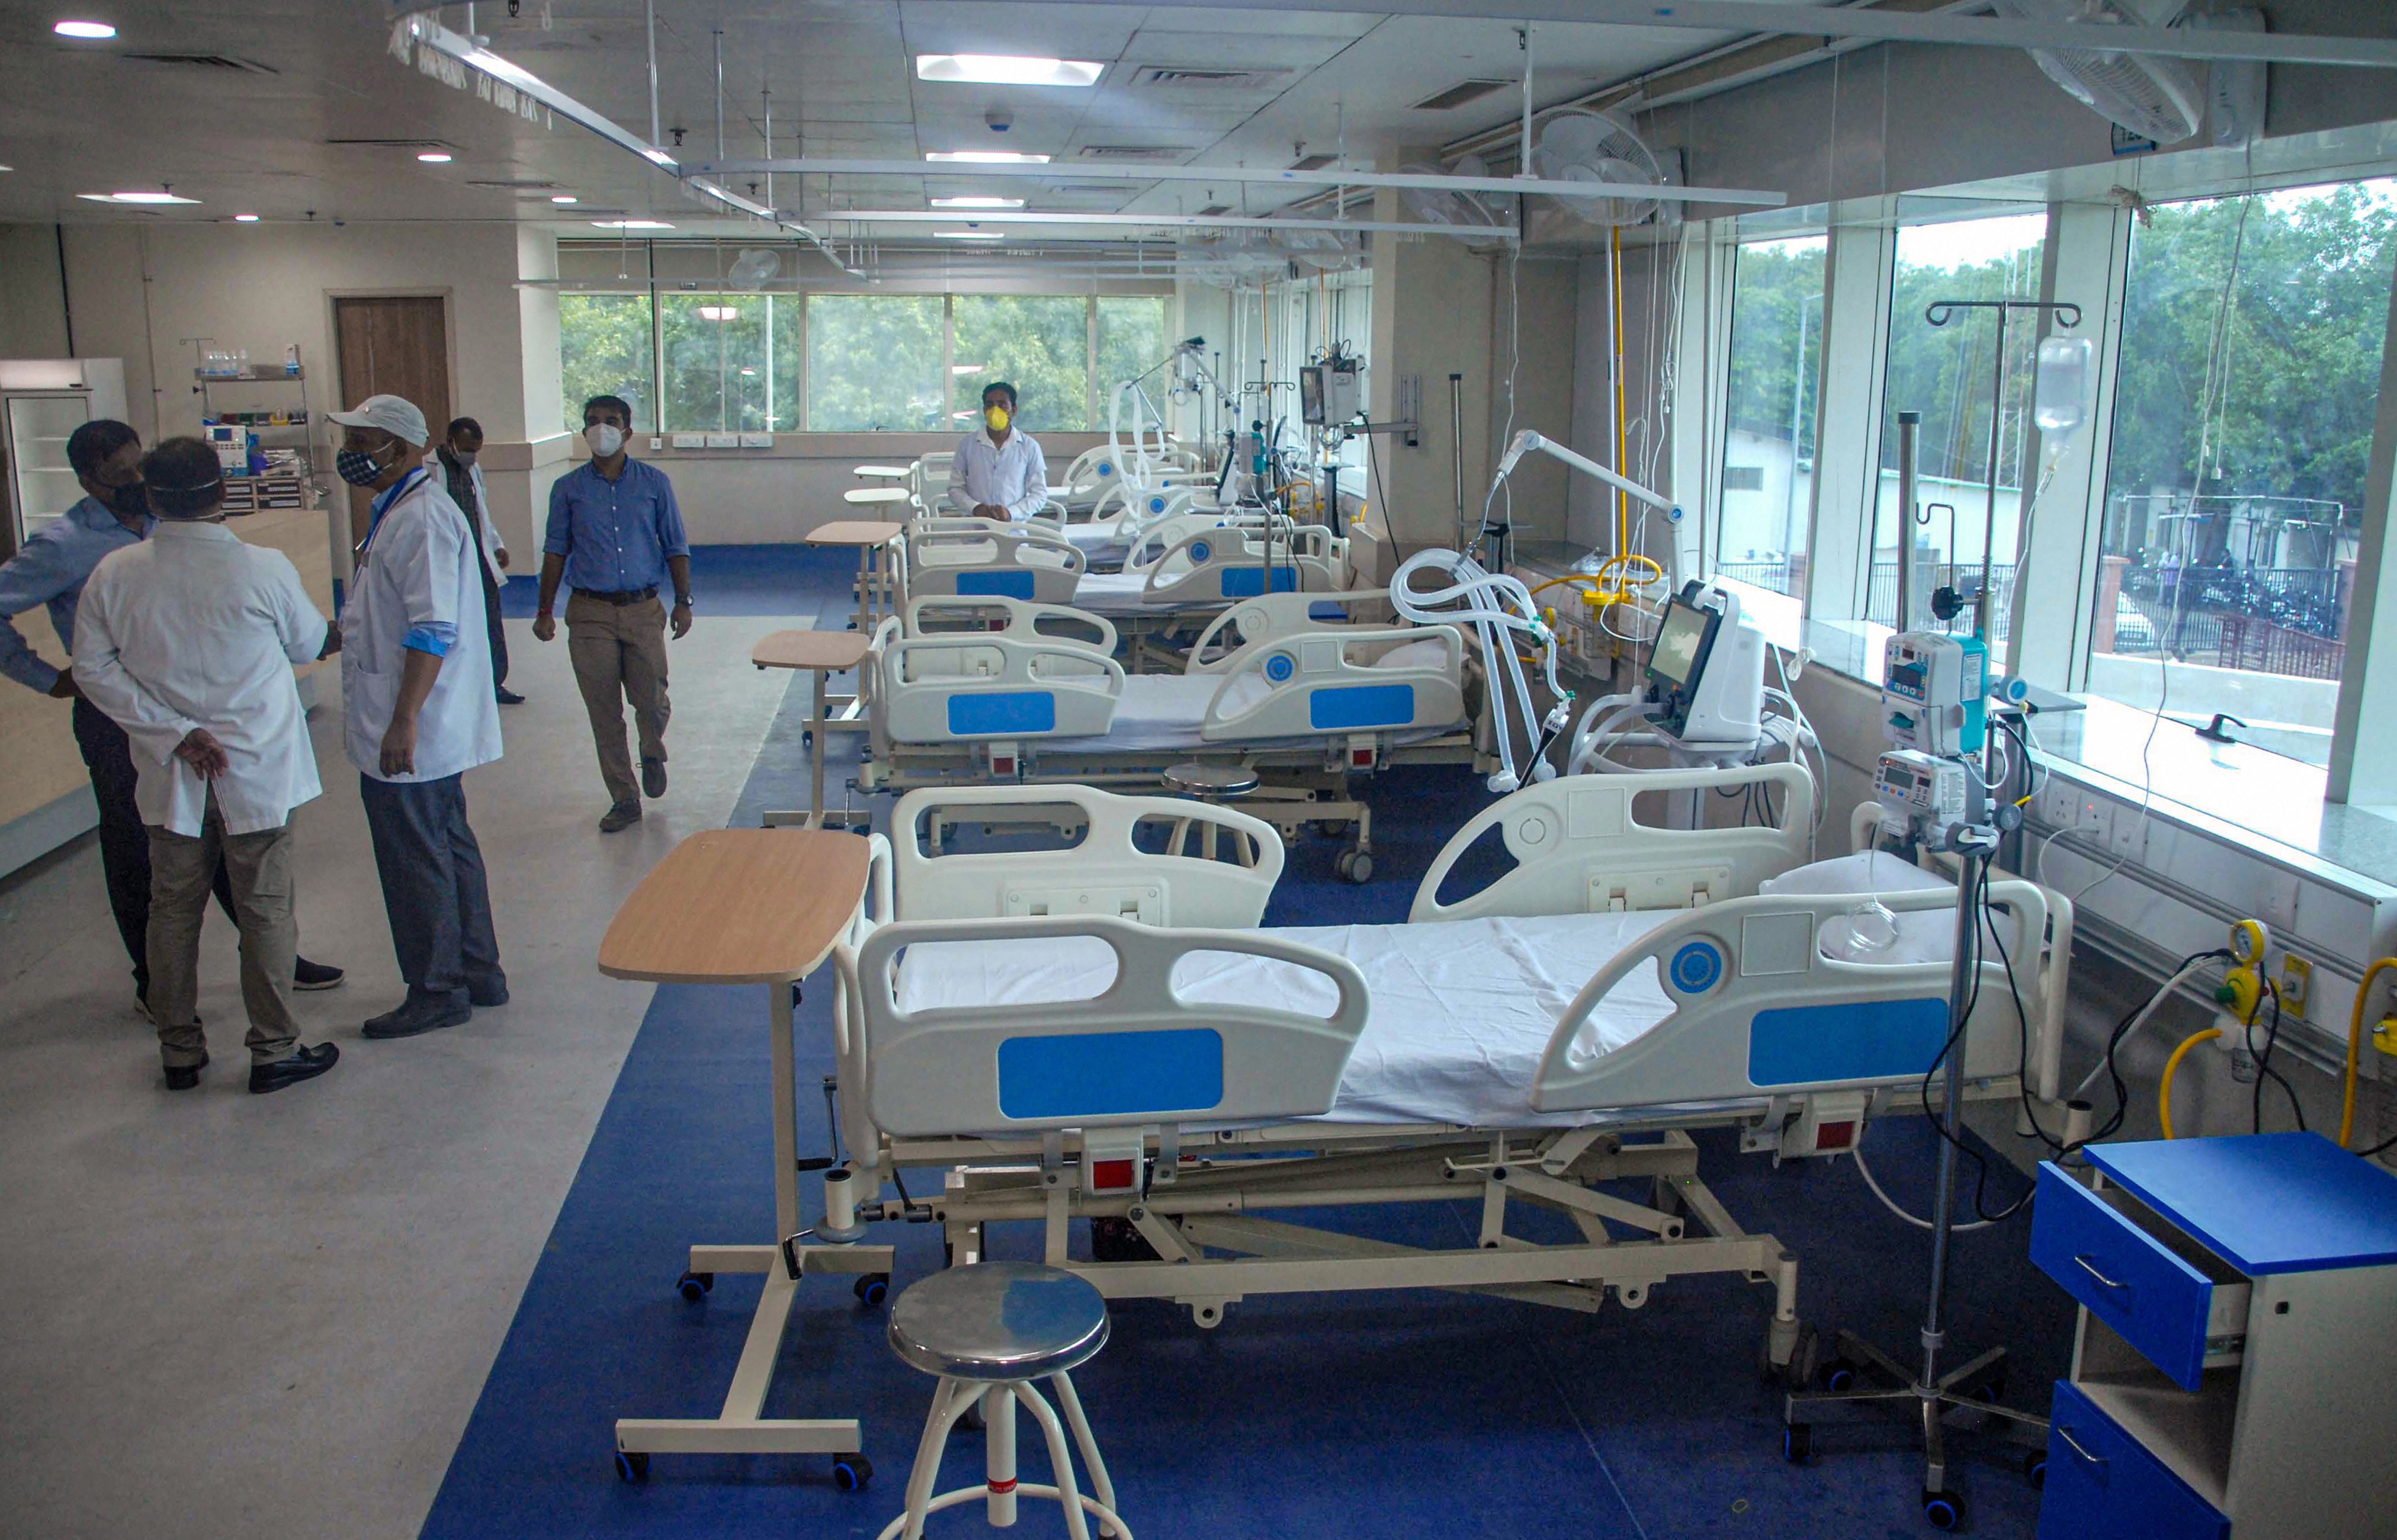 Take steps to prevent hospital fires, Home Ministry tells states, union territories